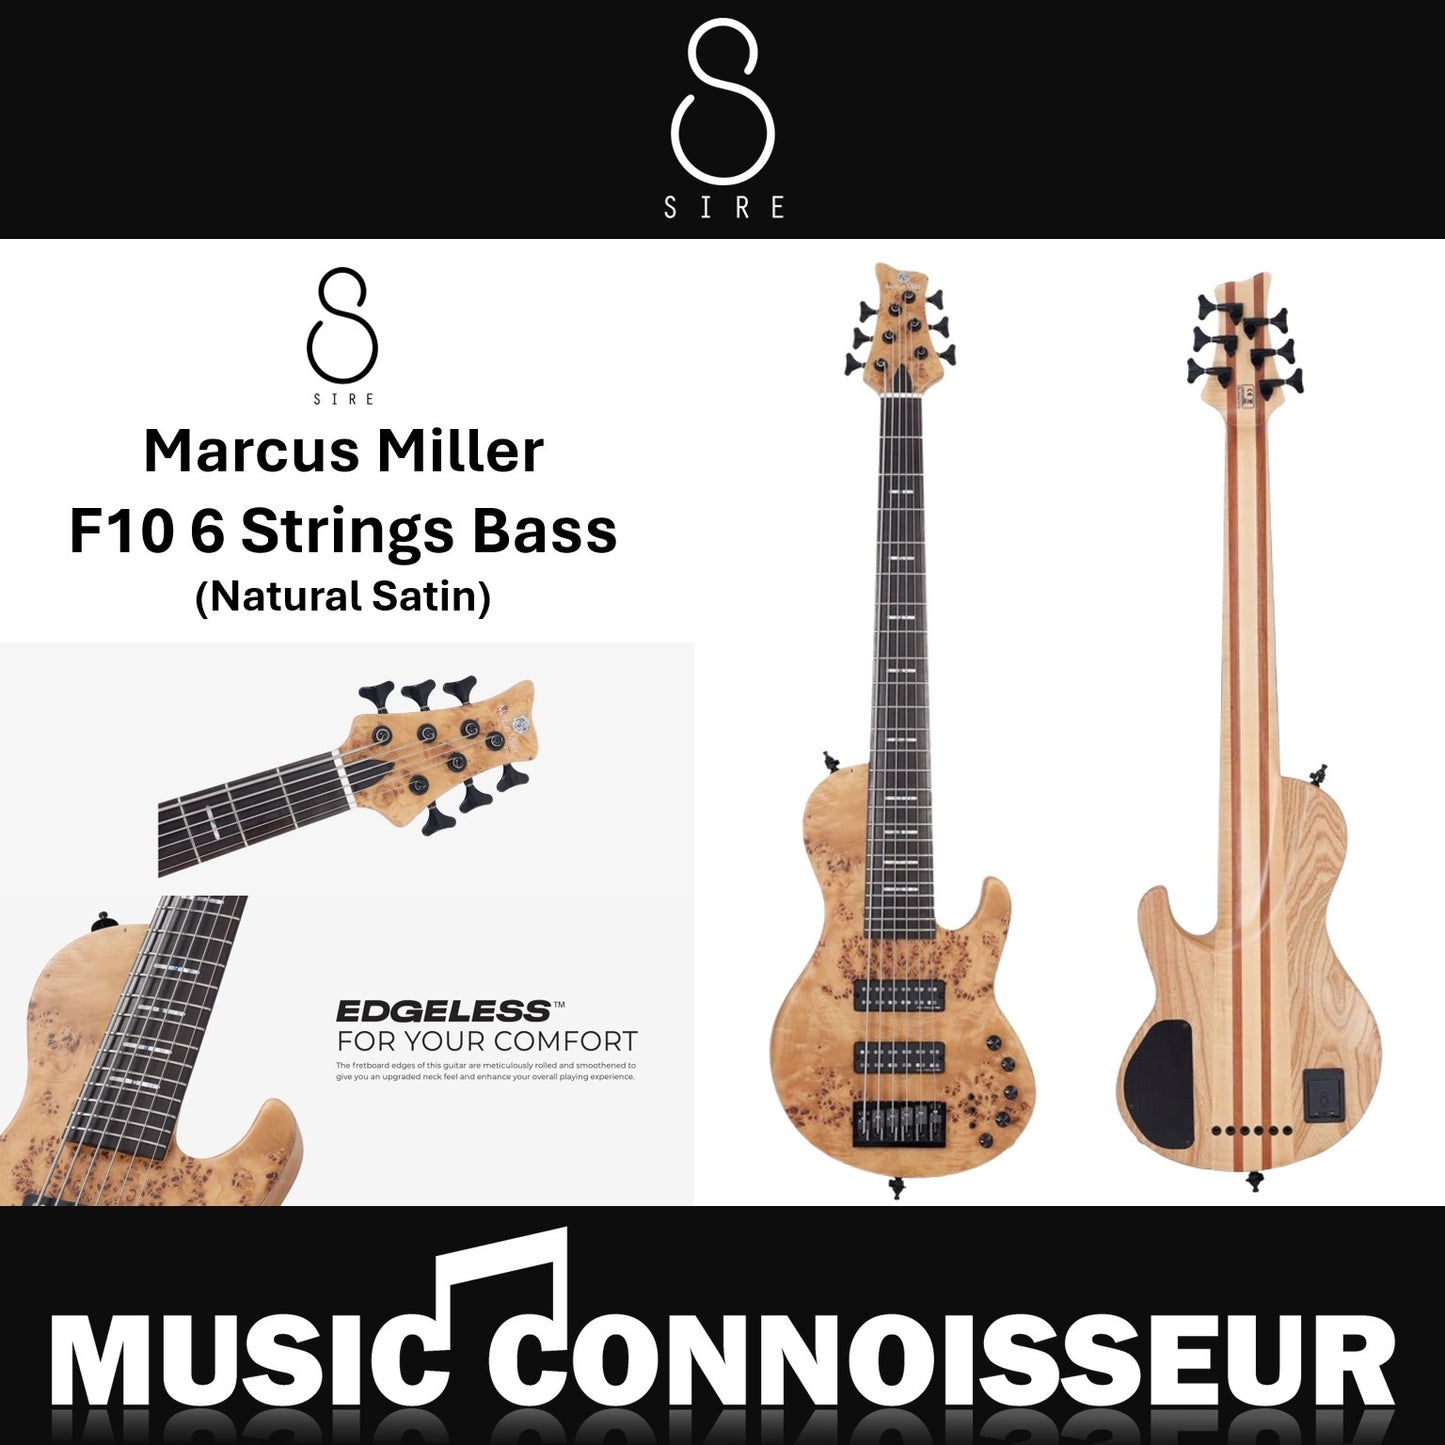 Sire Marcus Miller F10 6 Strings Bass (Natural Satin)